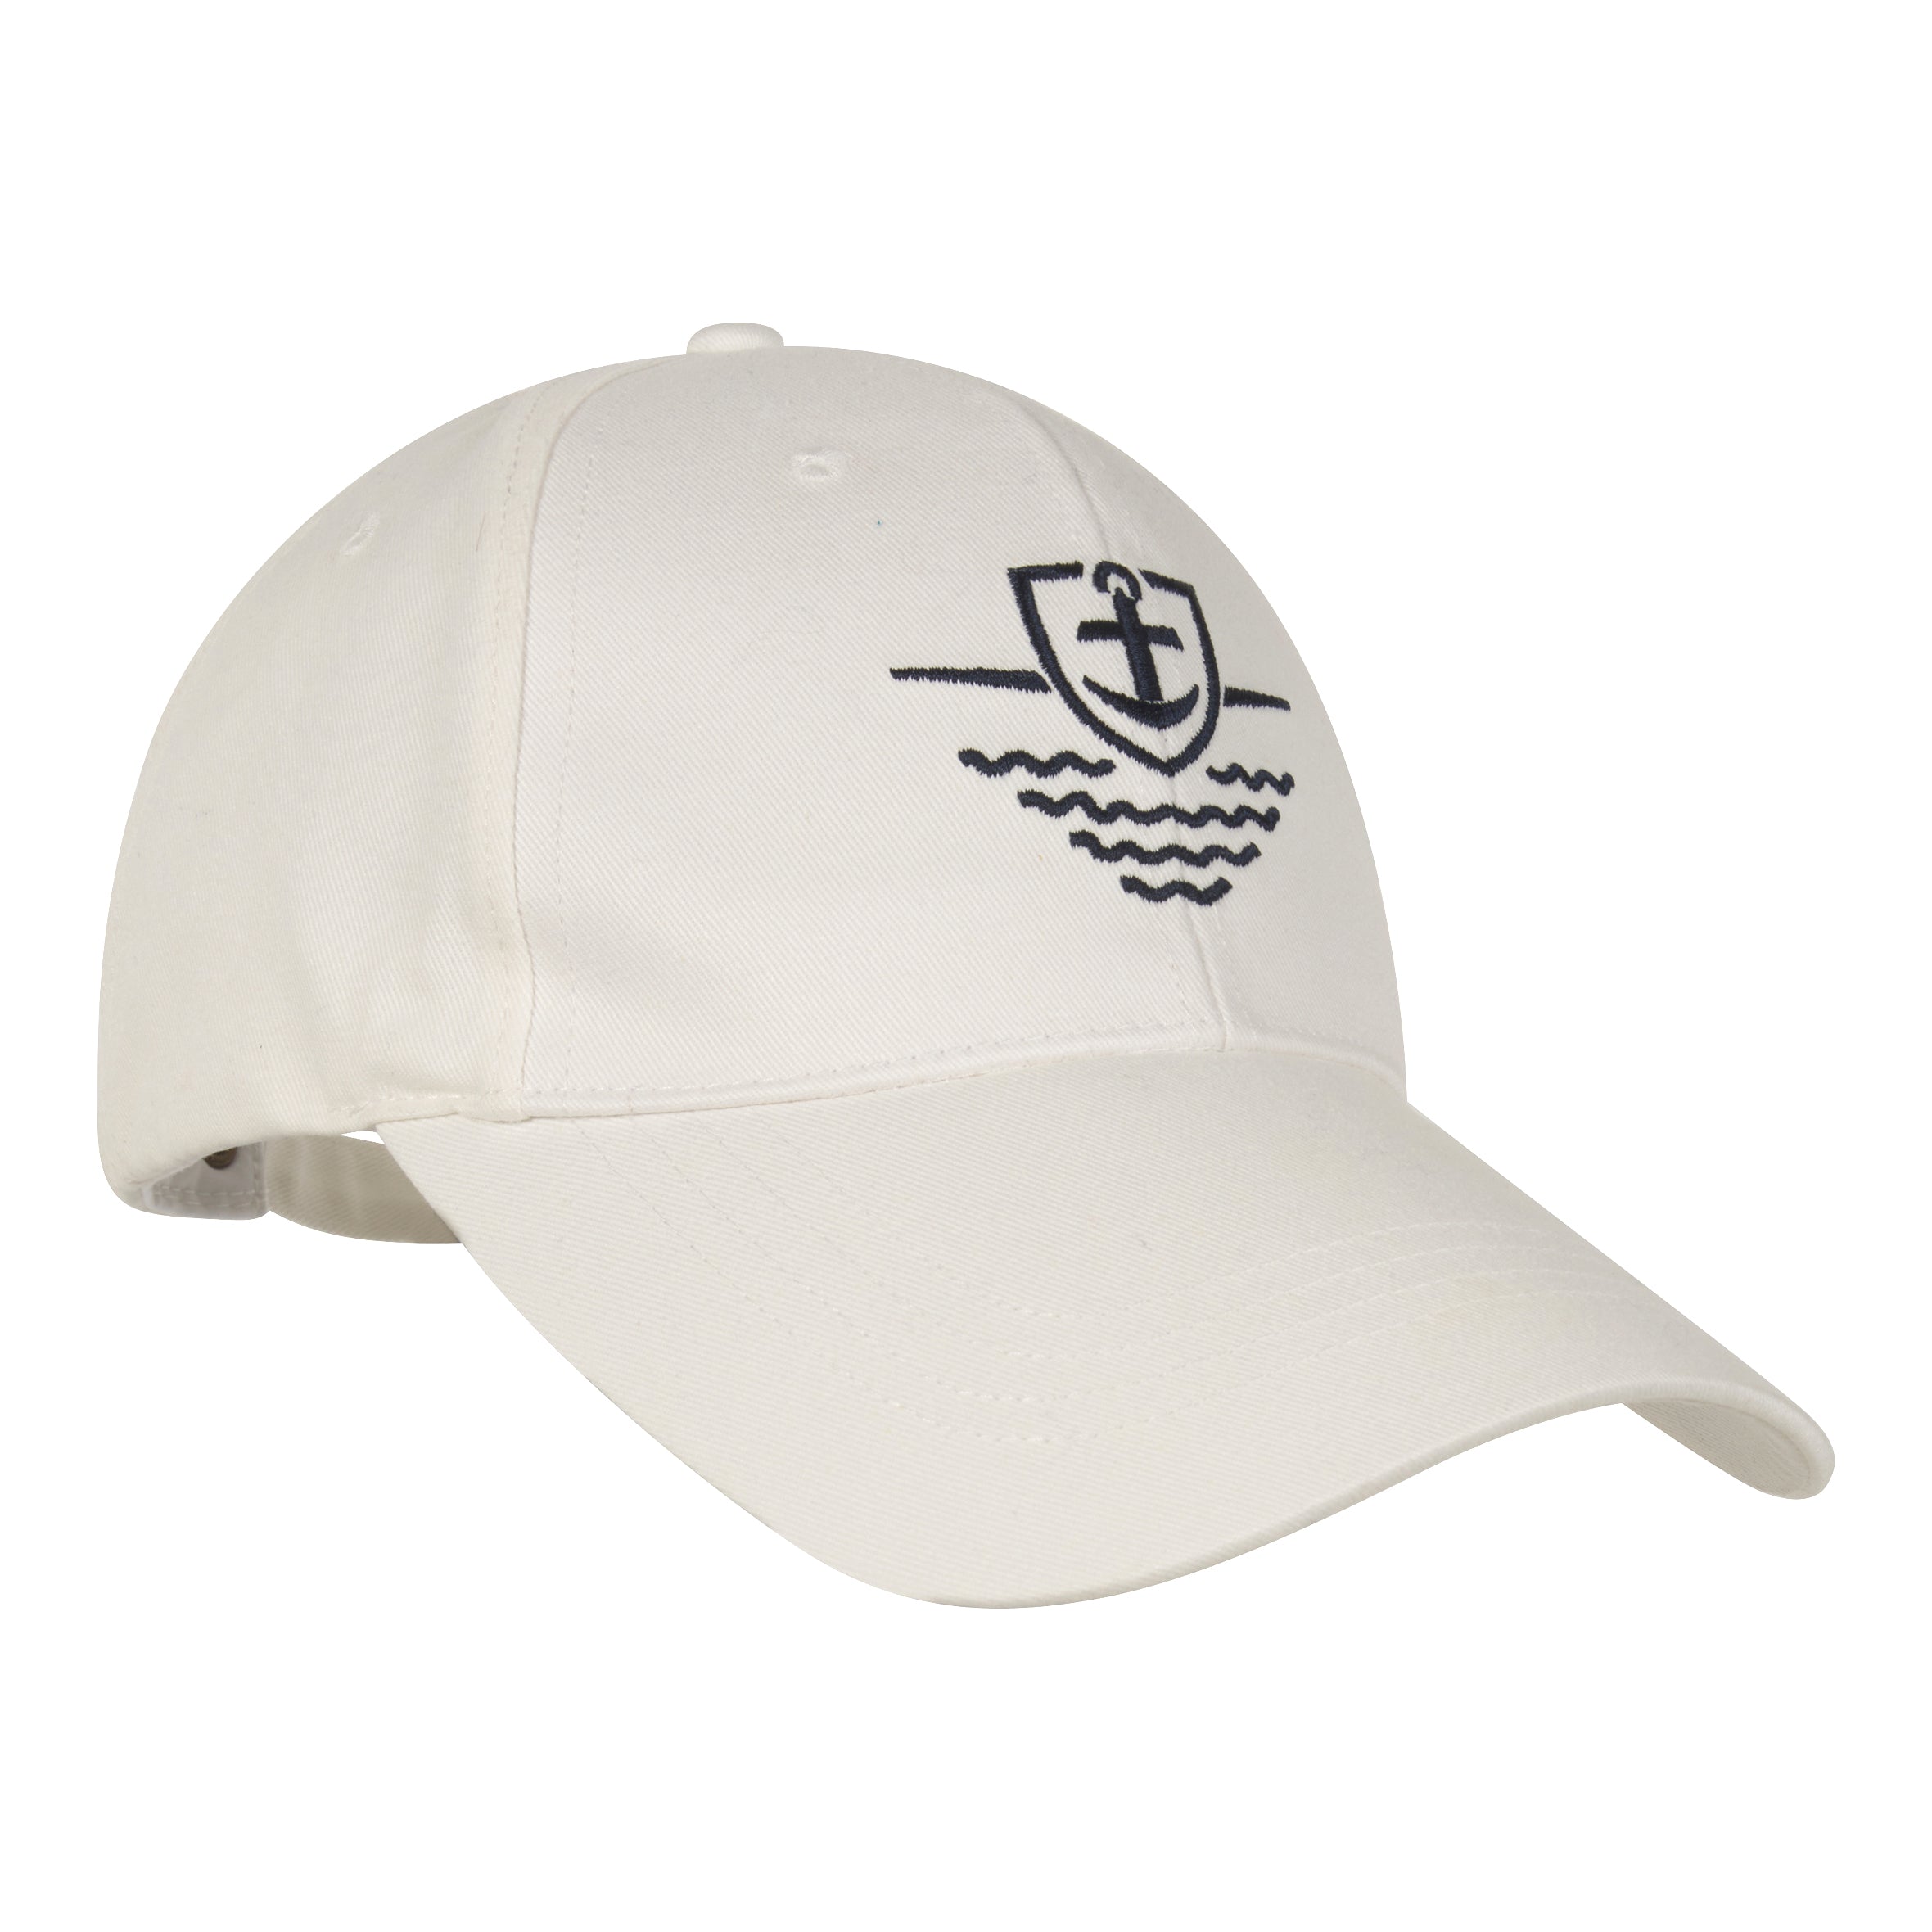 WHITE collector cap embroidered Navy